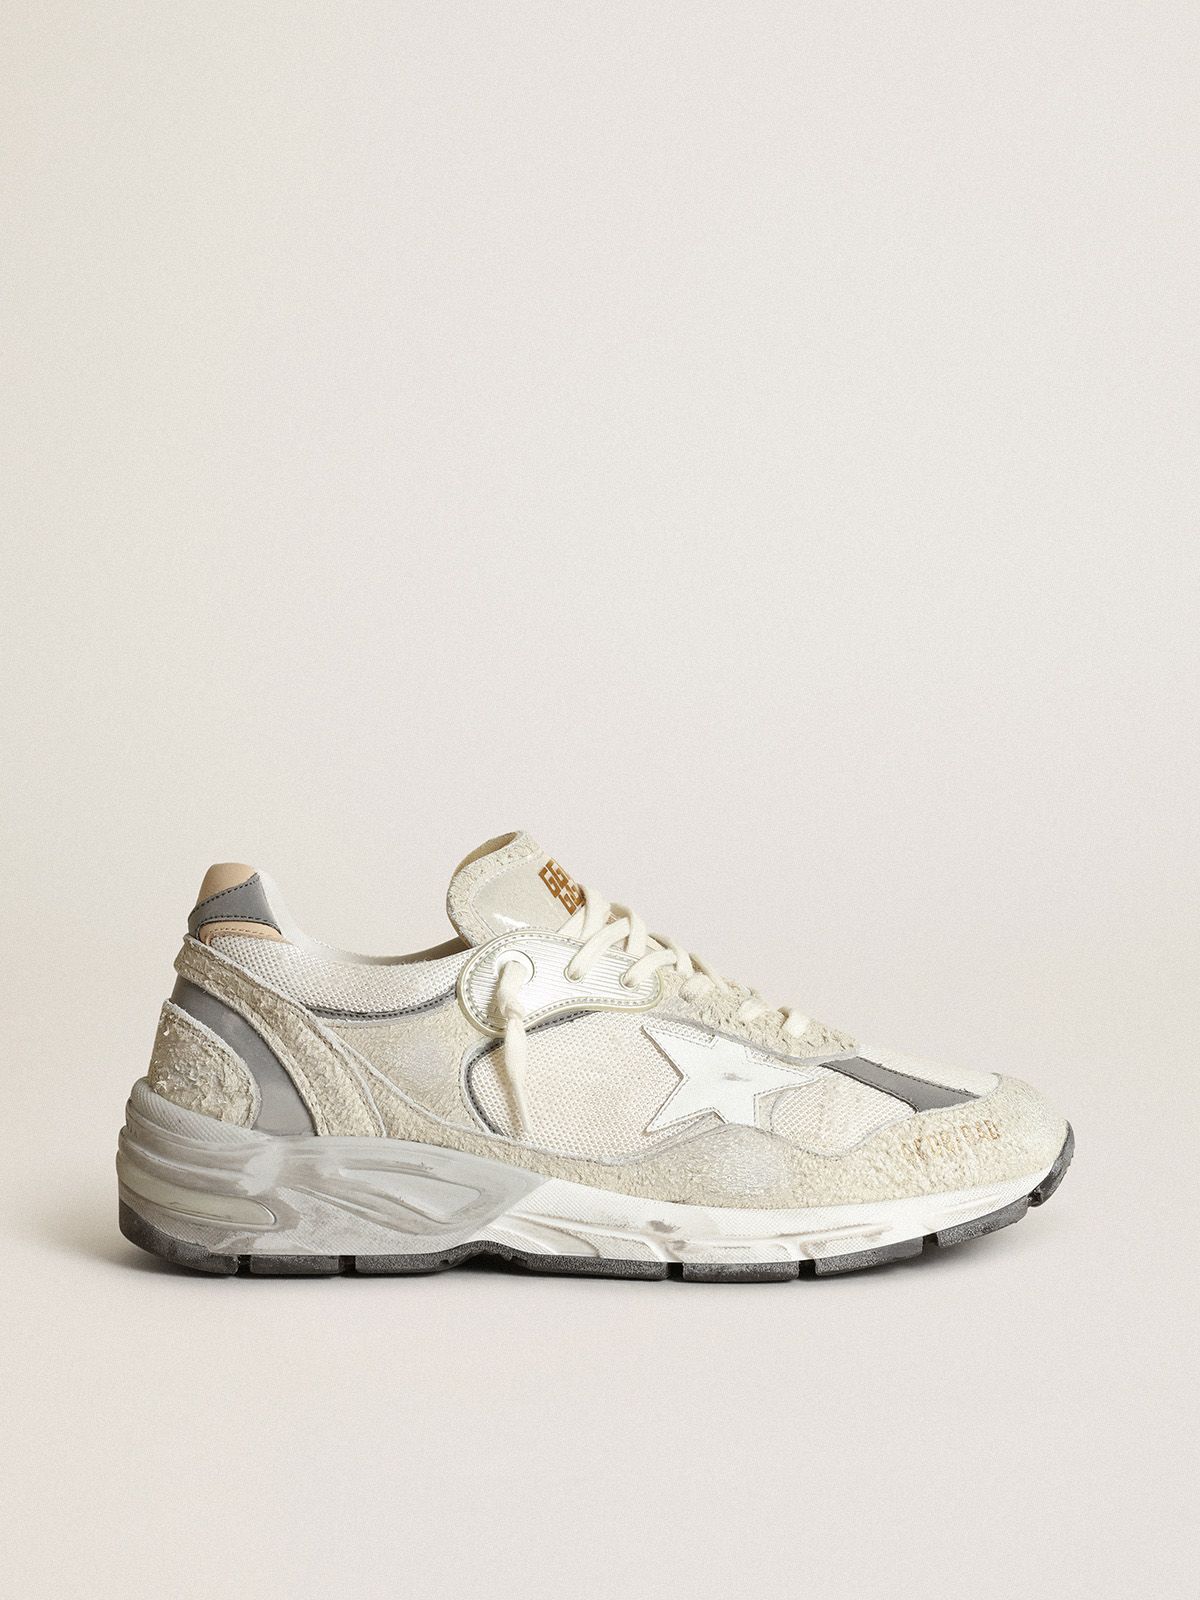 Dad-Star sneakers in white and gray suede with white leather star | 